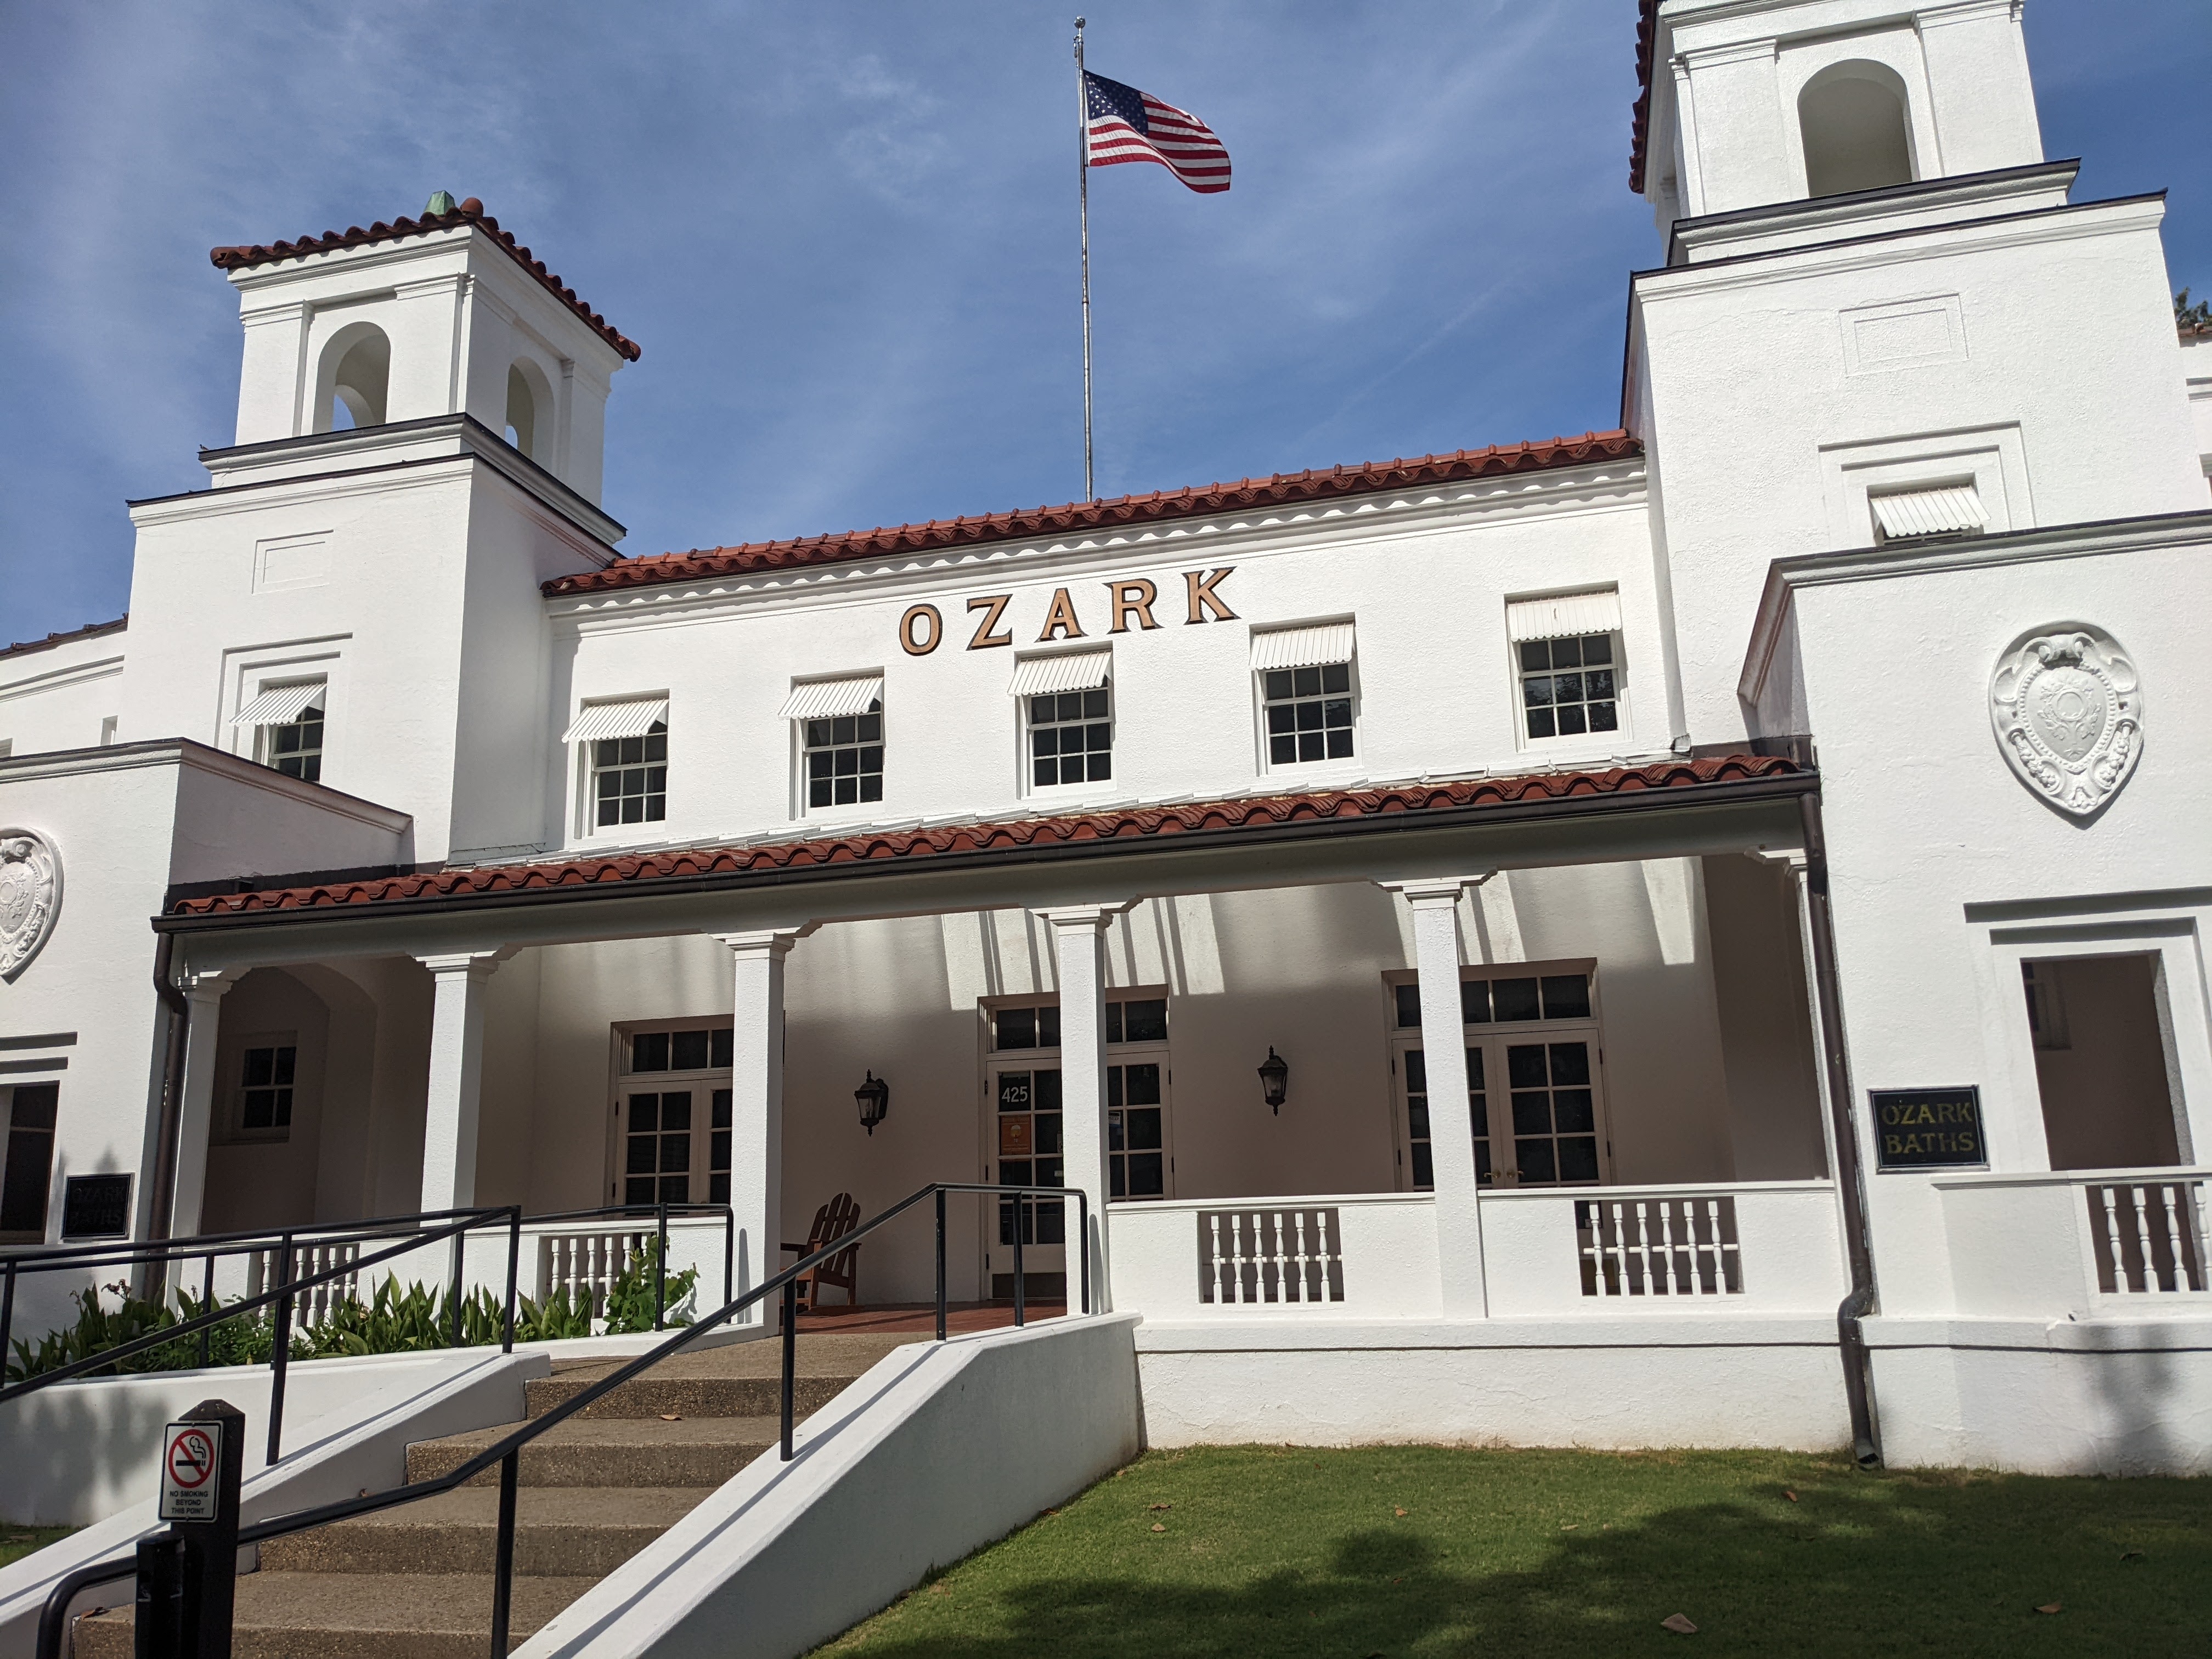 The Spanish Colonial Revival style Ozark Bathhouse (built in 1922), now the Hot Springs National Park Cultural Center